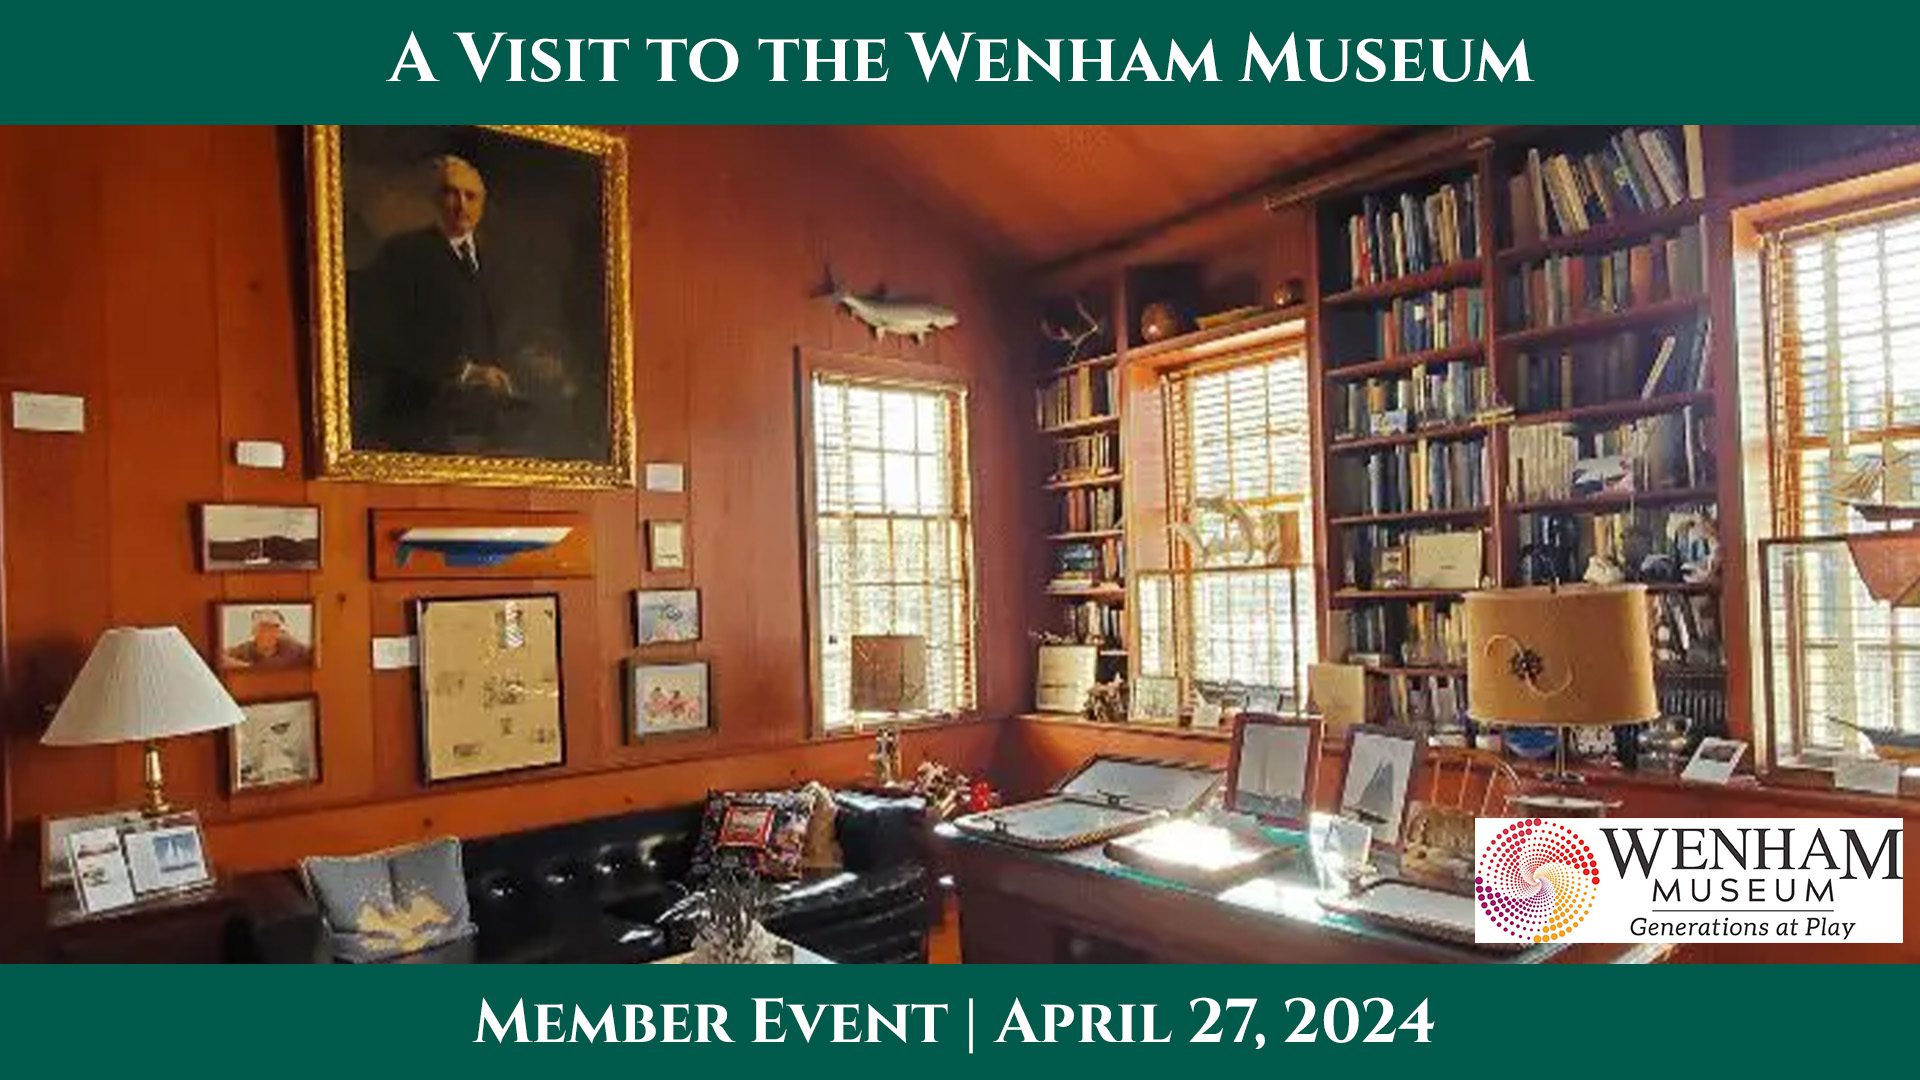 Upgrade your study space with timeless classics such as bookshelves, vintage furniture, and portraits. Don't miss the event at the Wenham Museum for unique inspiration and ideas.